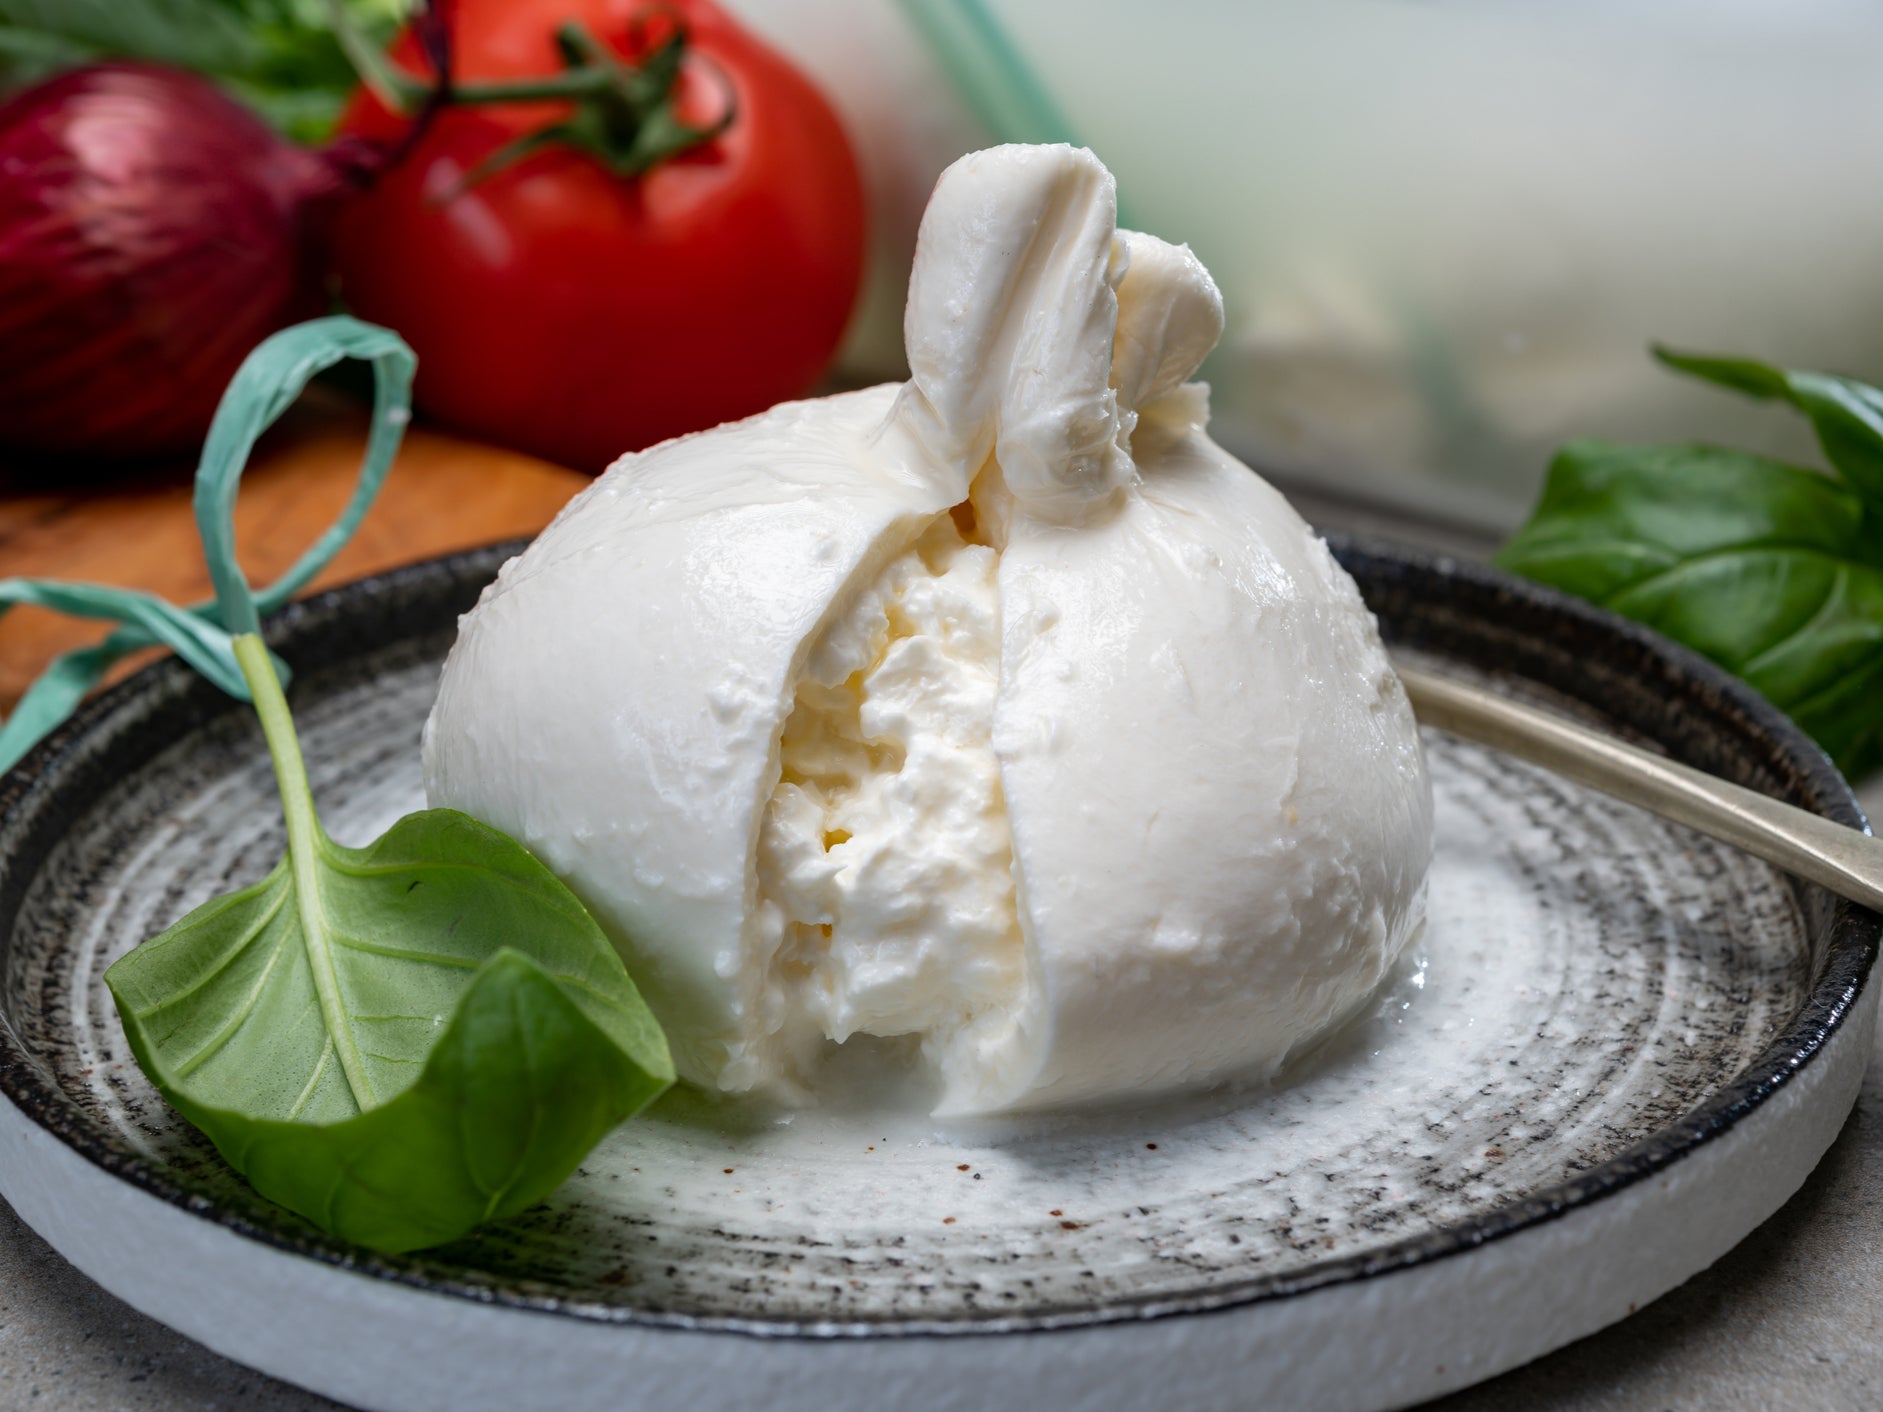 People are surprisingly divided over burrata as debate oozes online ...